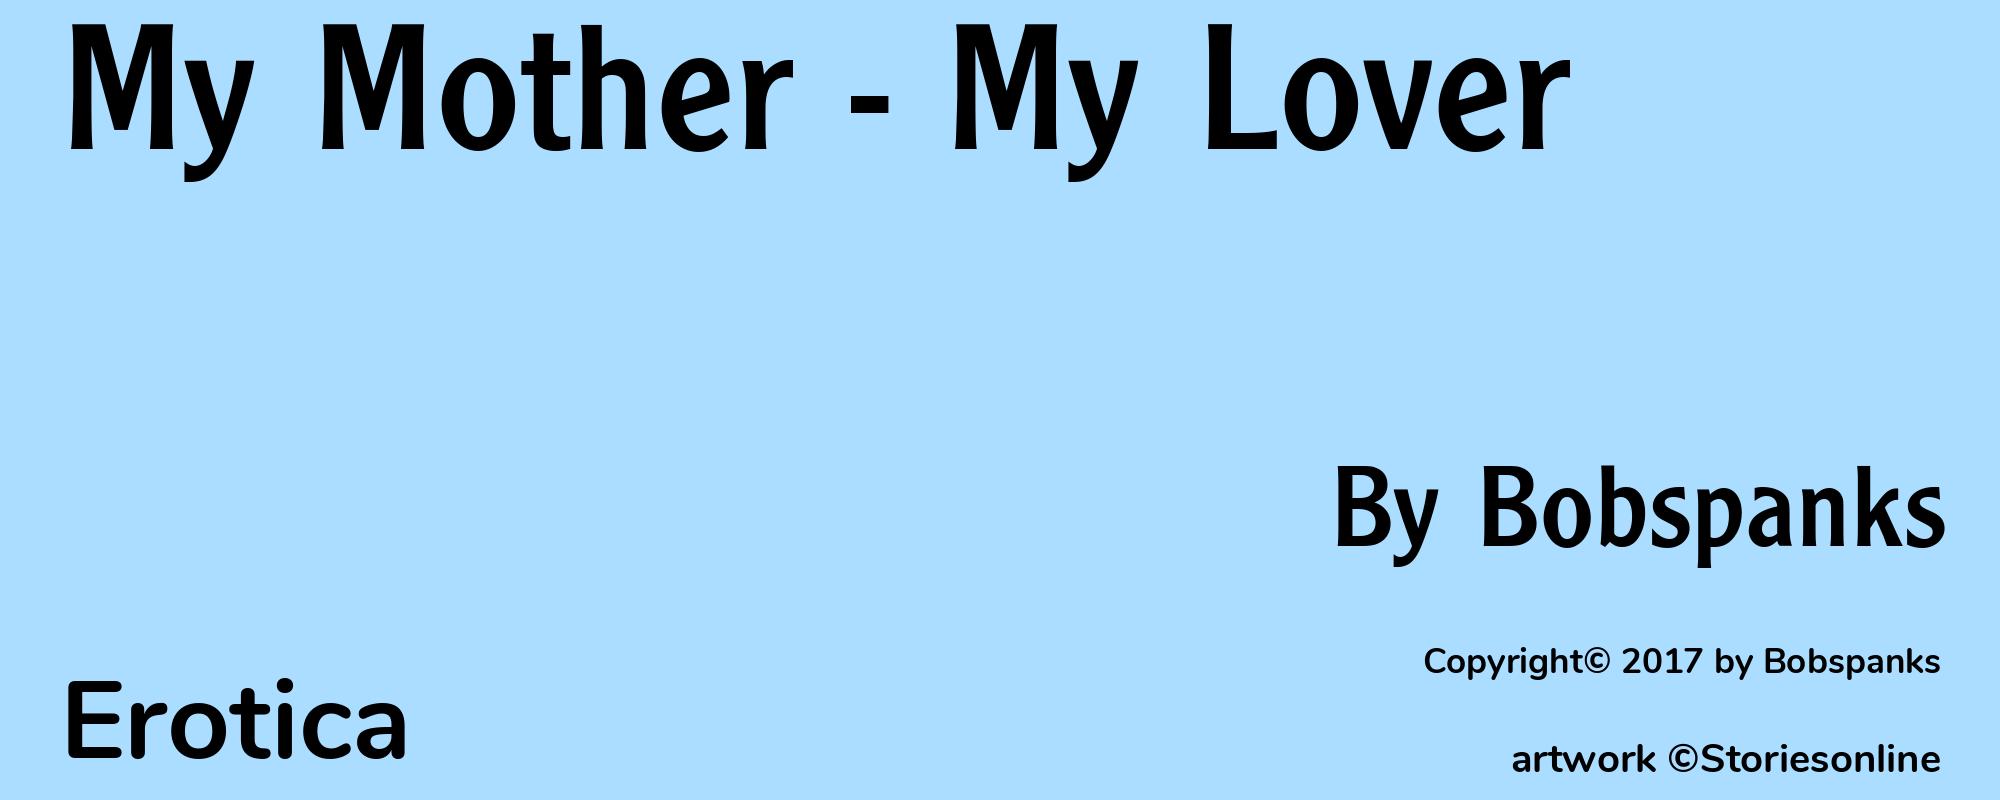 My Mother - My Lover - Cover